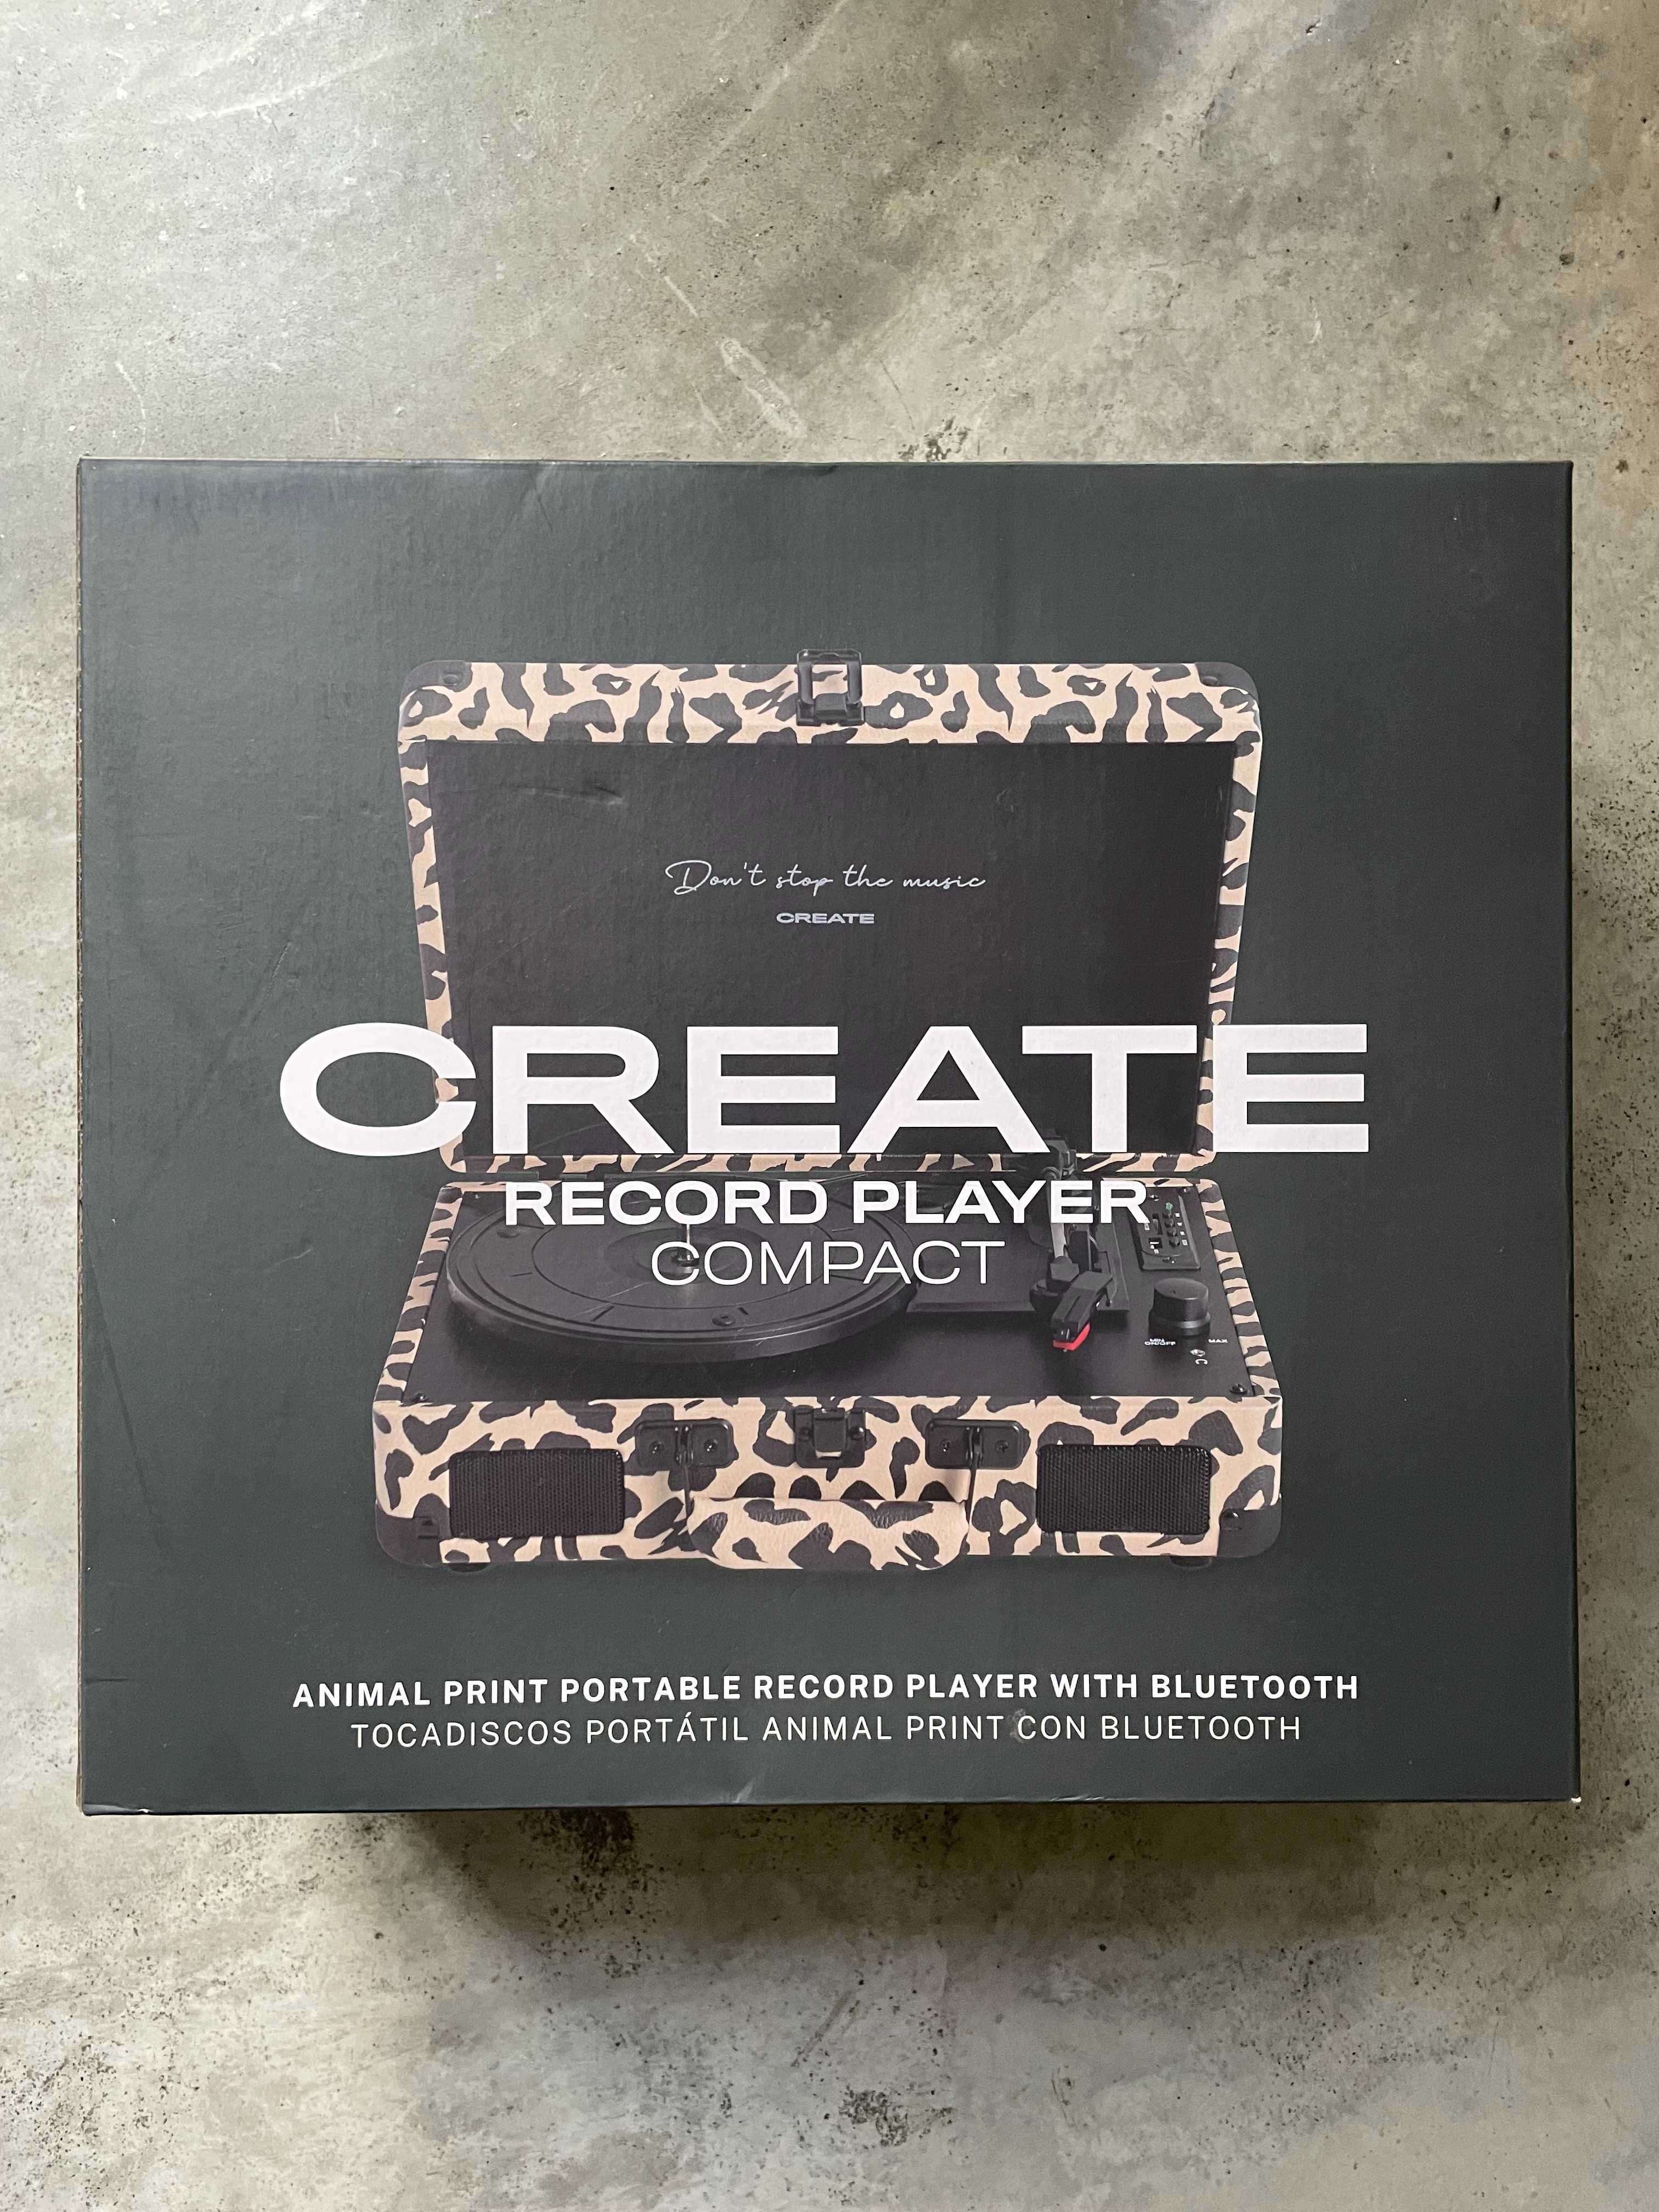 Record player compact - CREATE - BRAND NEW